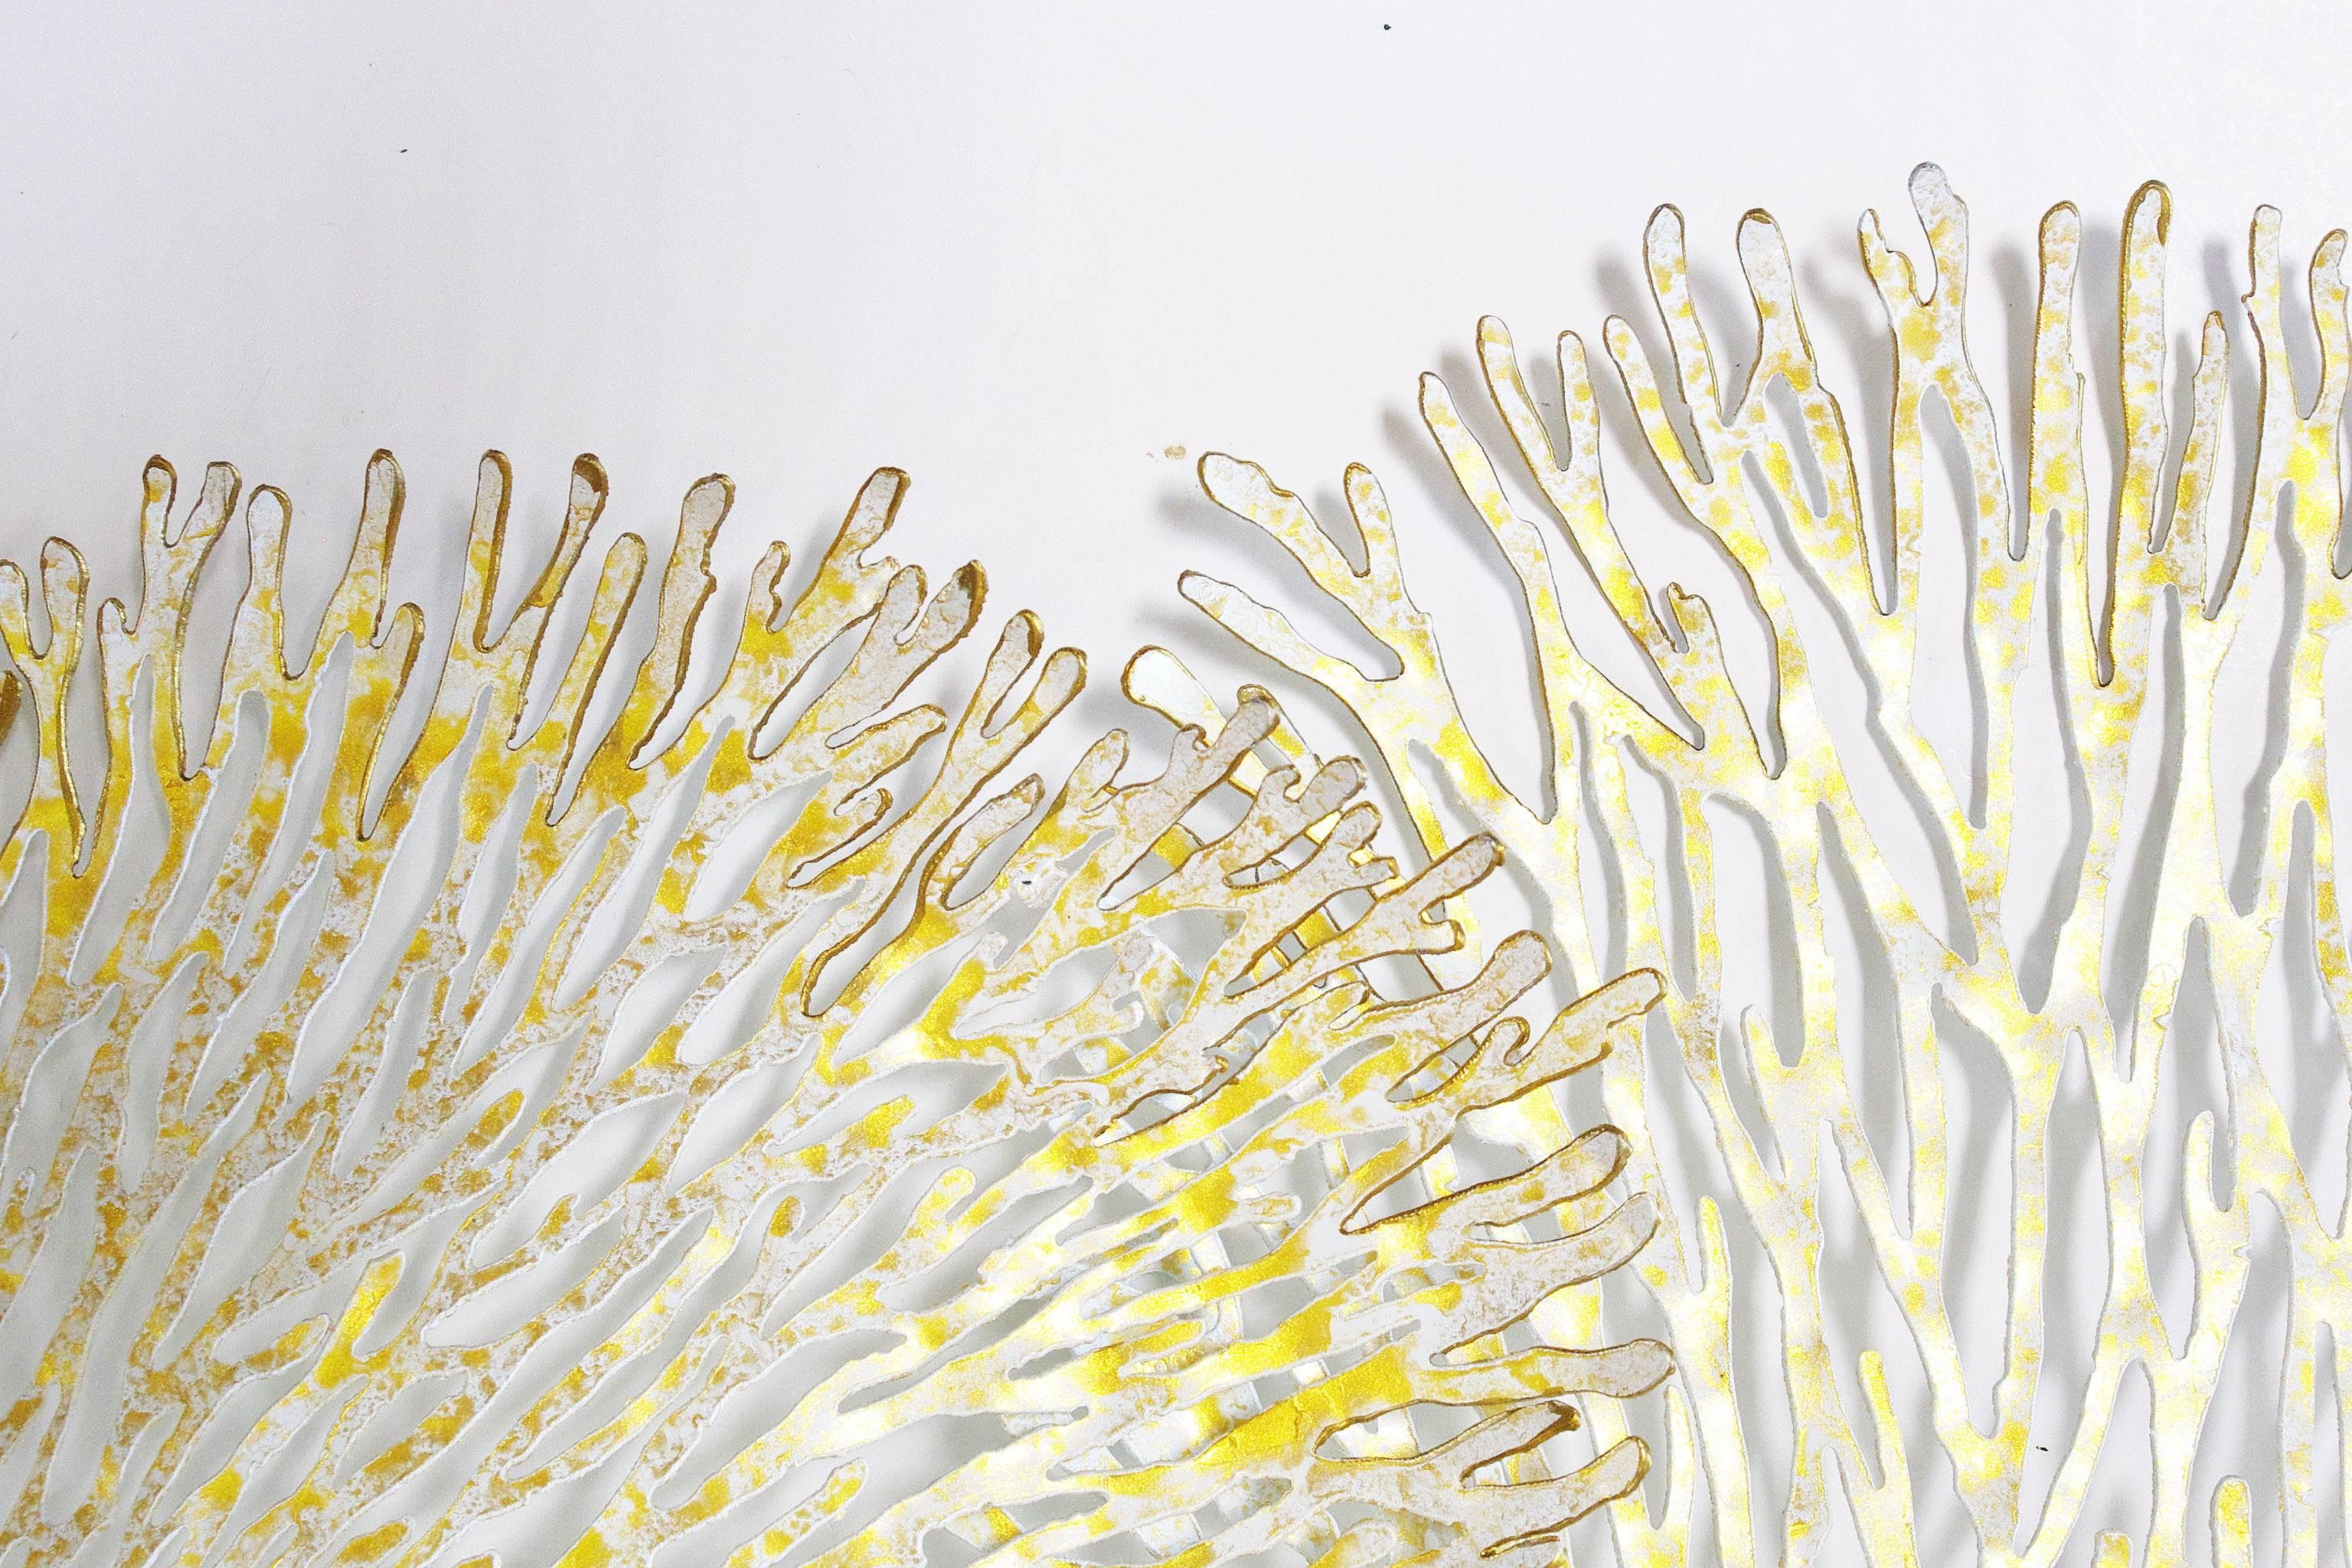 Painted White and Gold Iron Coral Wall Sculpture FINAL CLEARANCE SALE